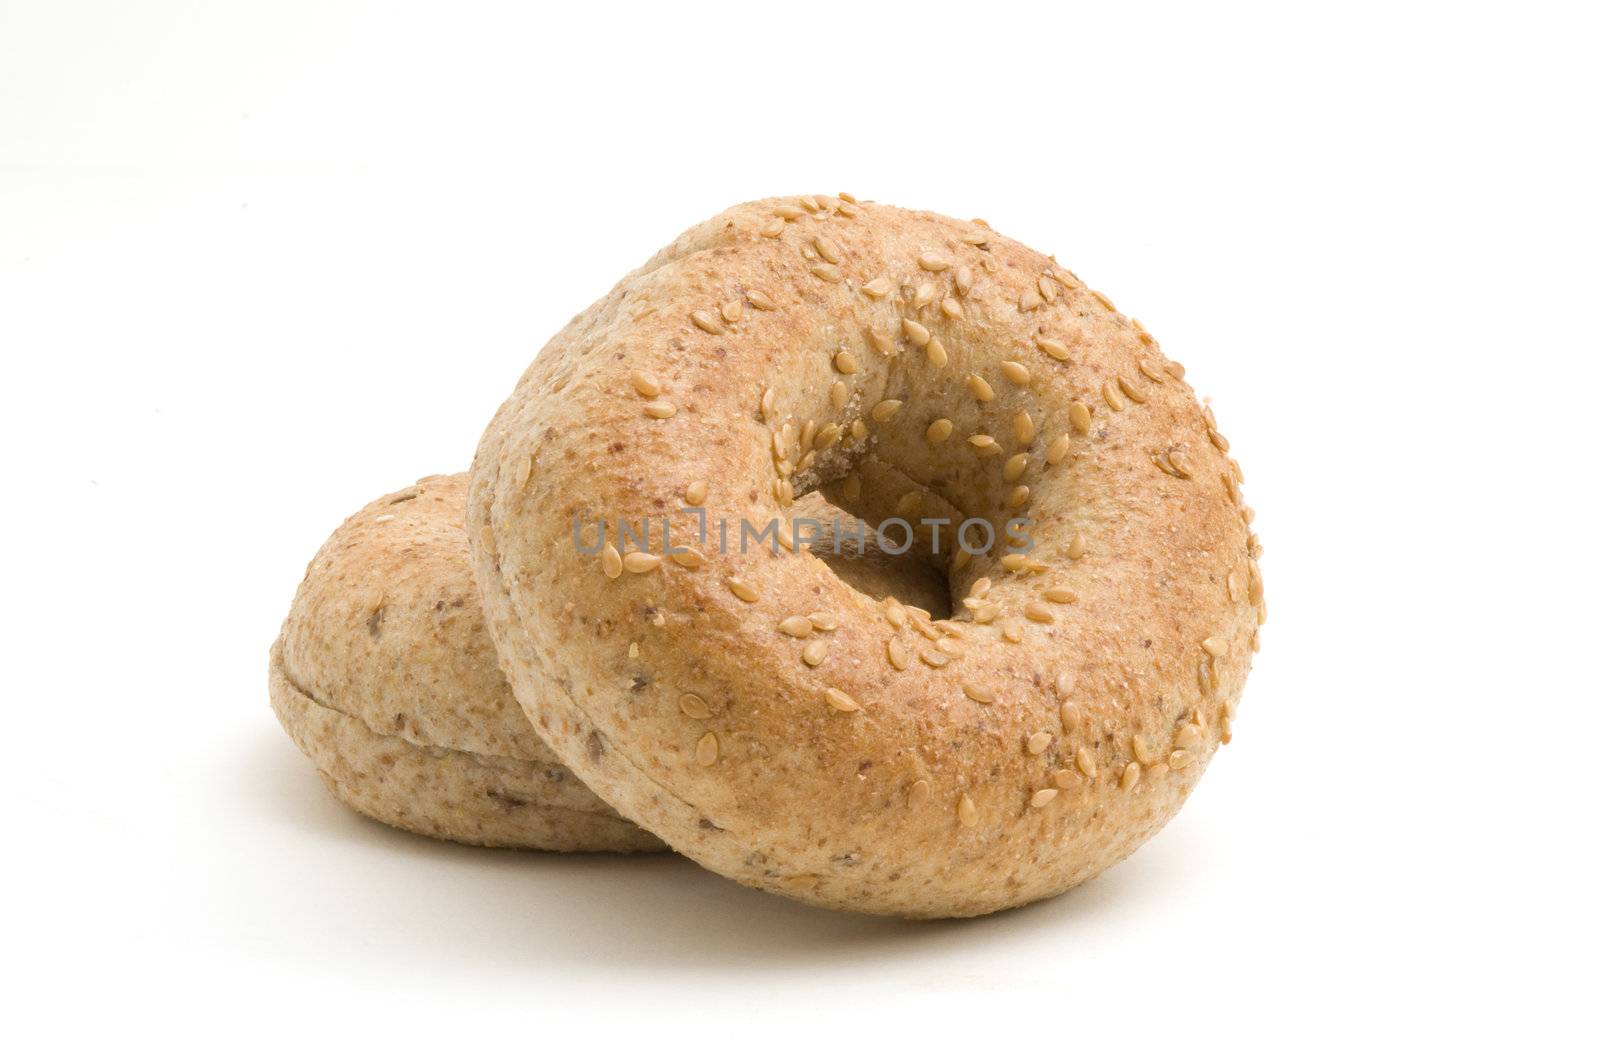 Whole grain bagels isolated on a white background